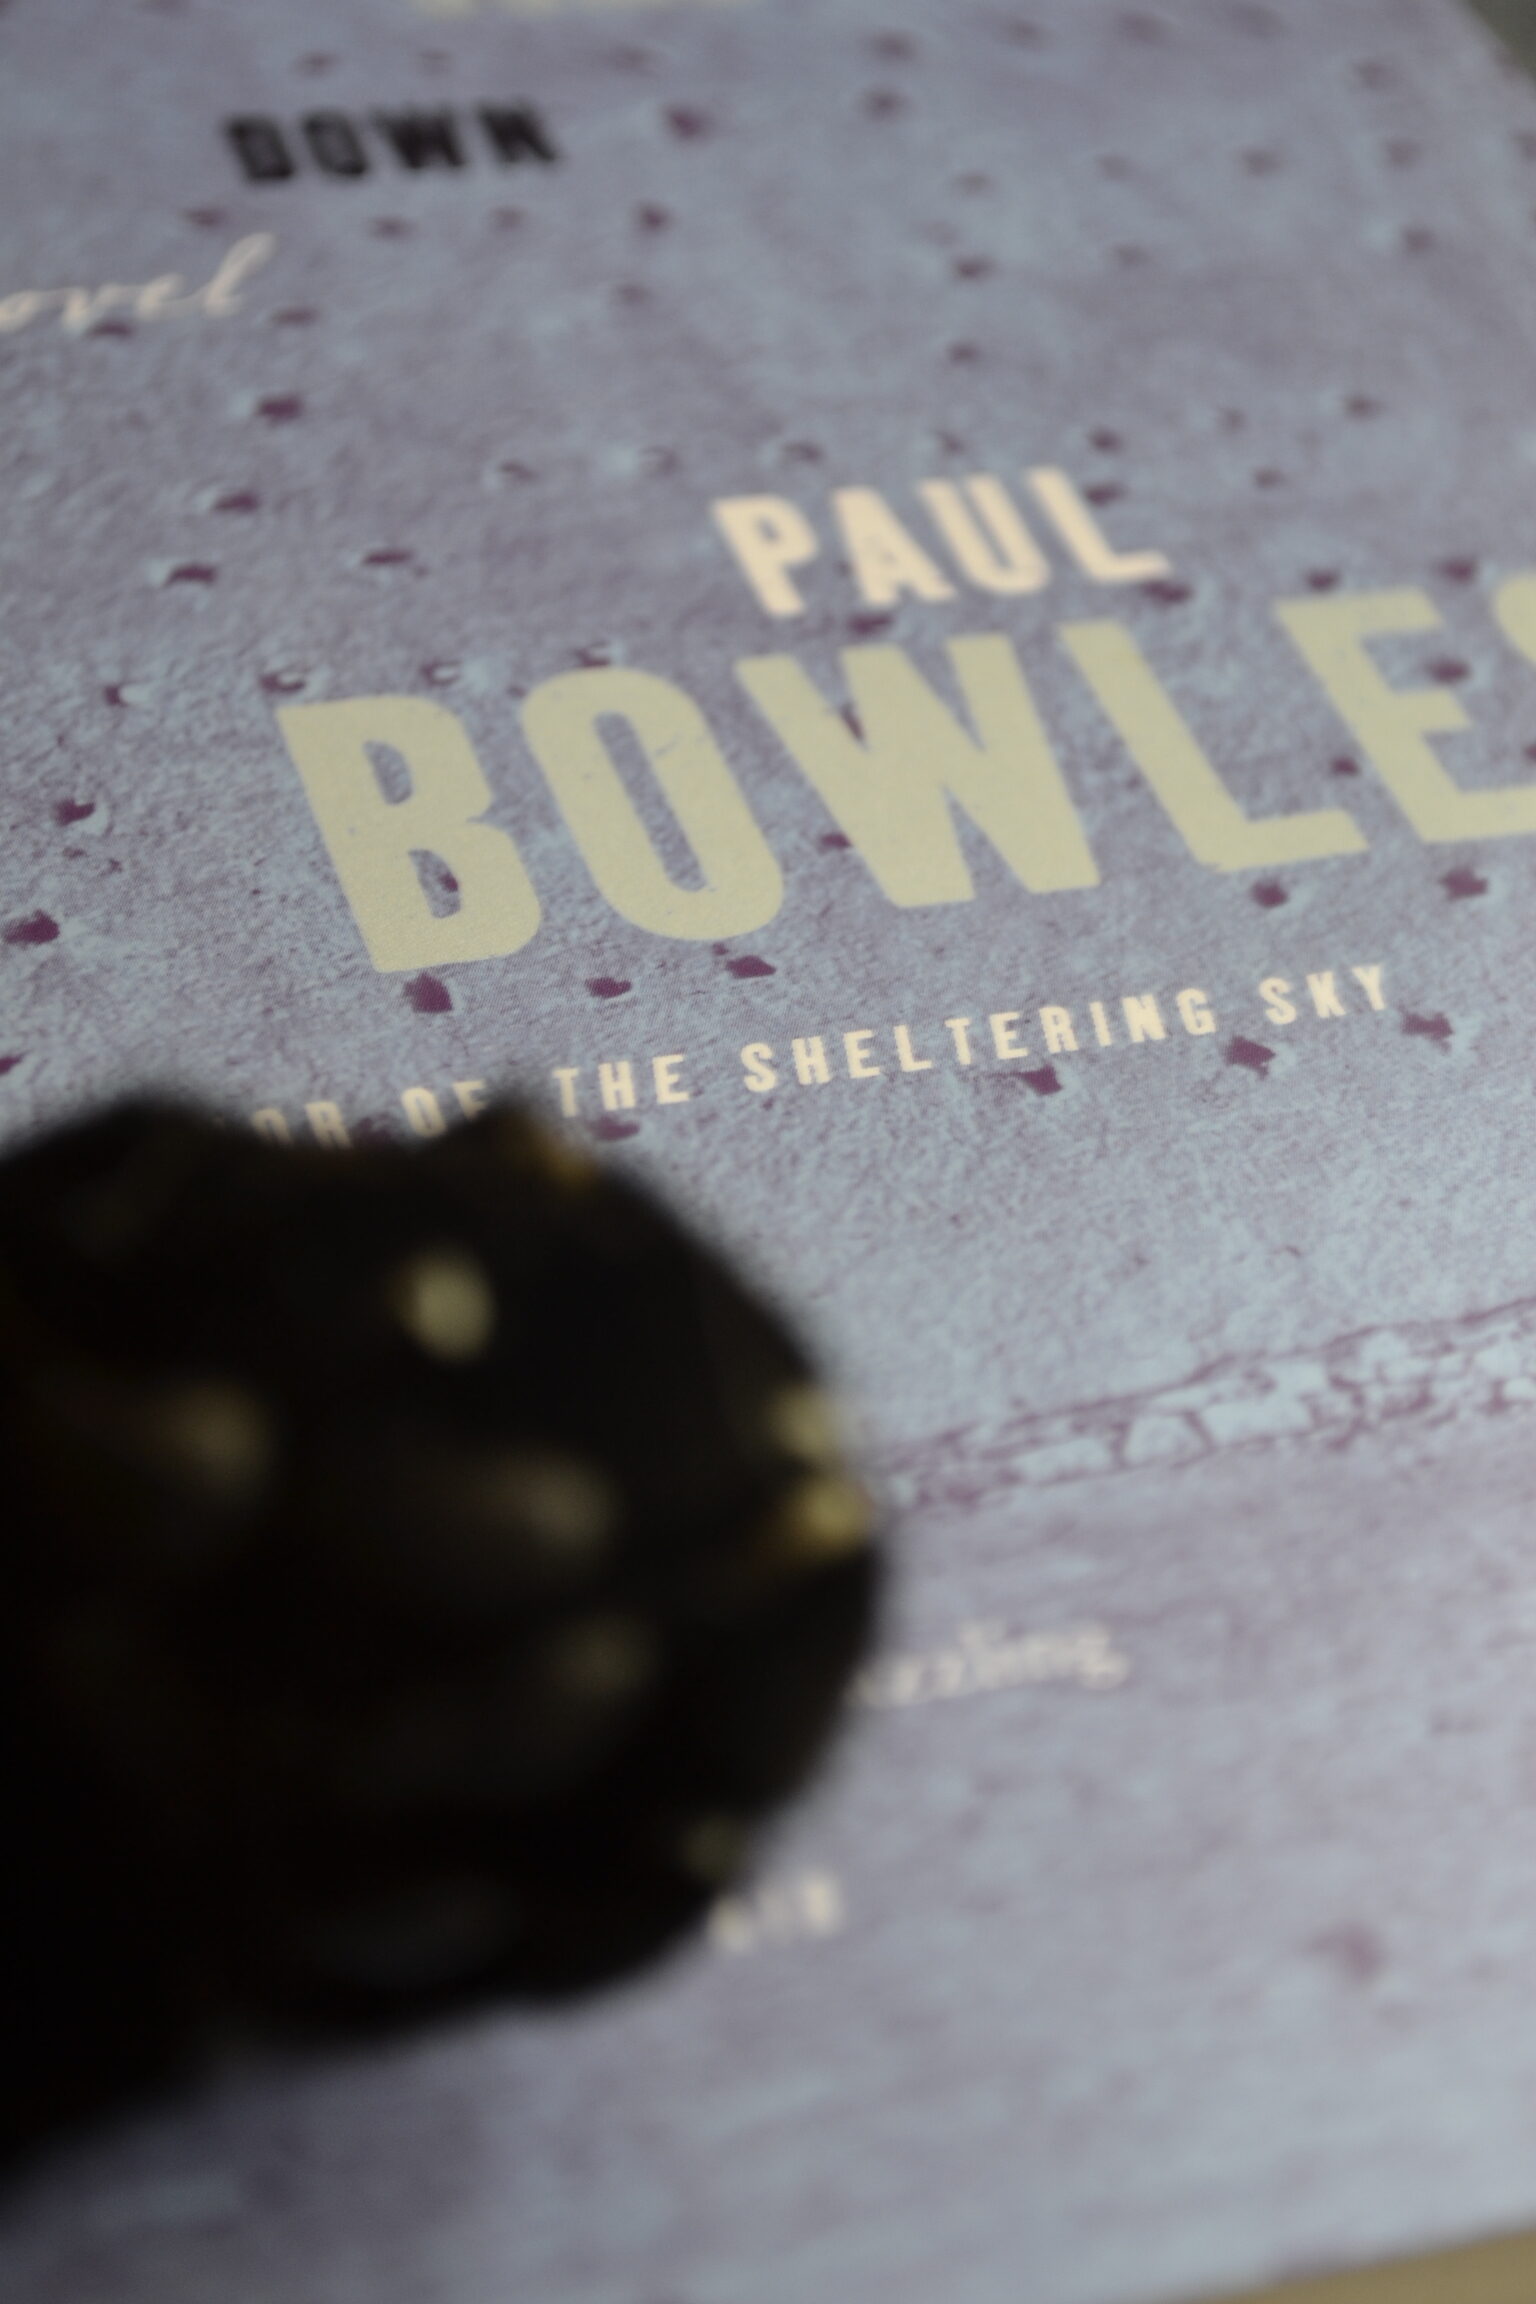 A black paw rests on a book beside the words Paul Bowles.